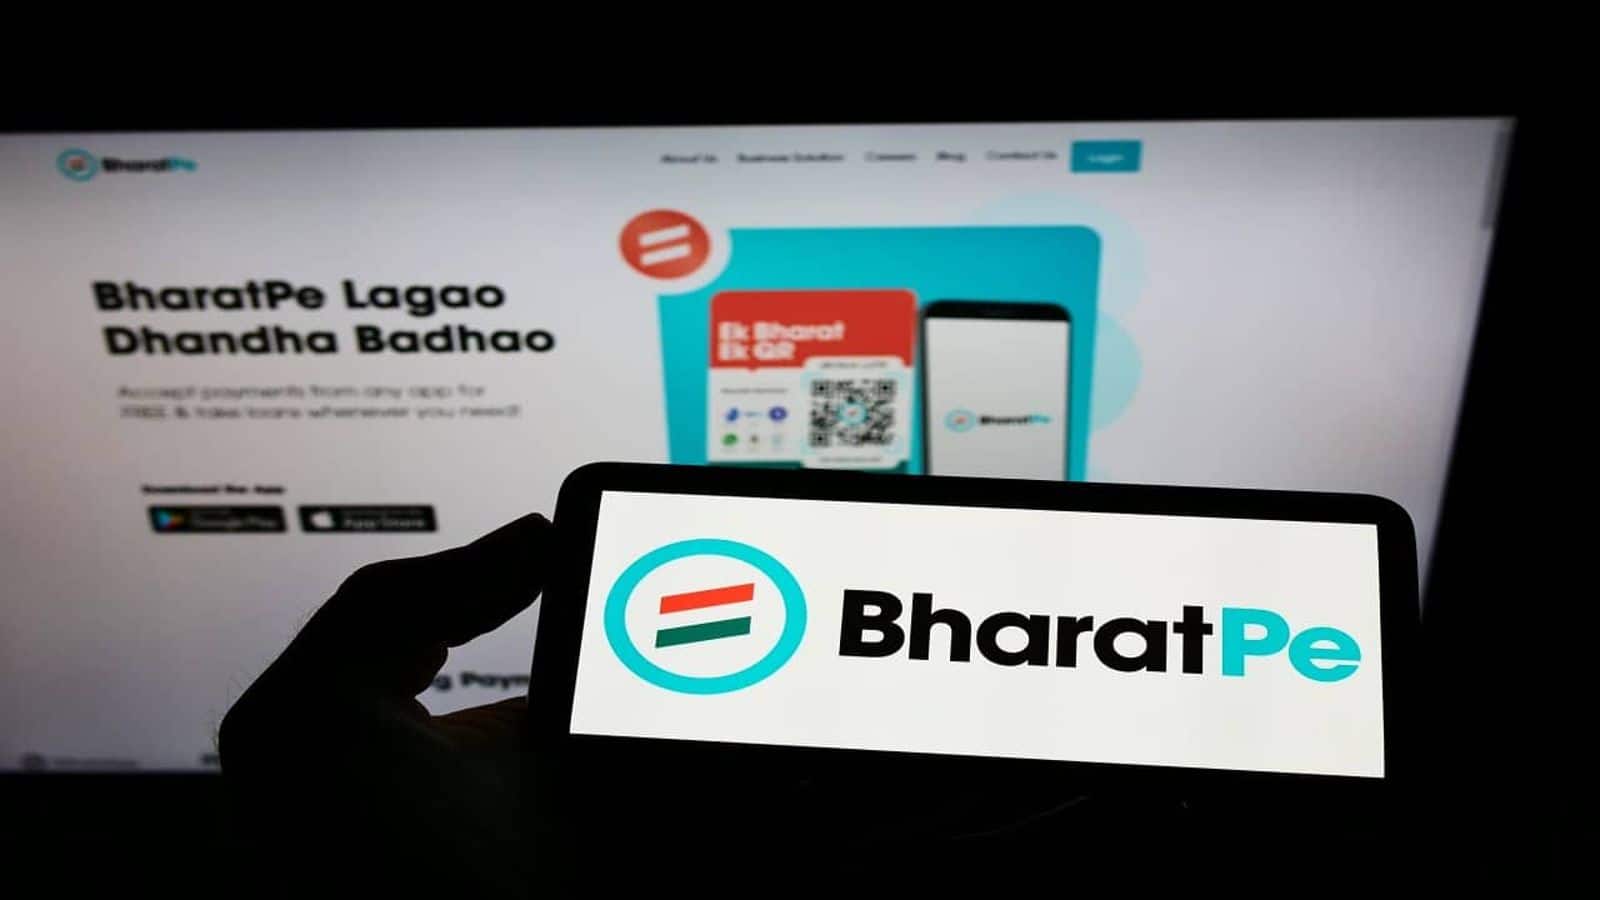 Meet Bharatpe One: An all-in-one payment device for merchants